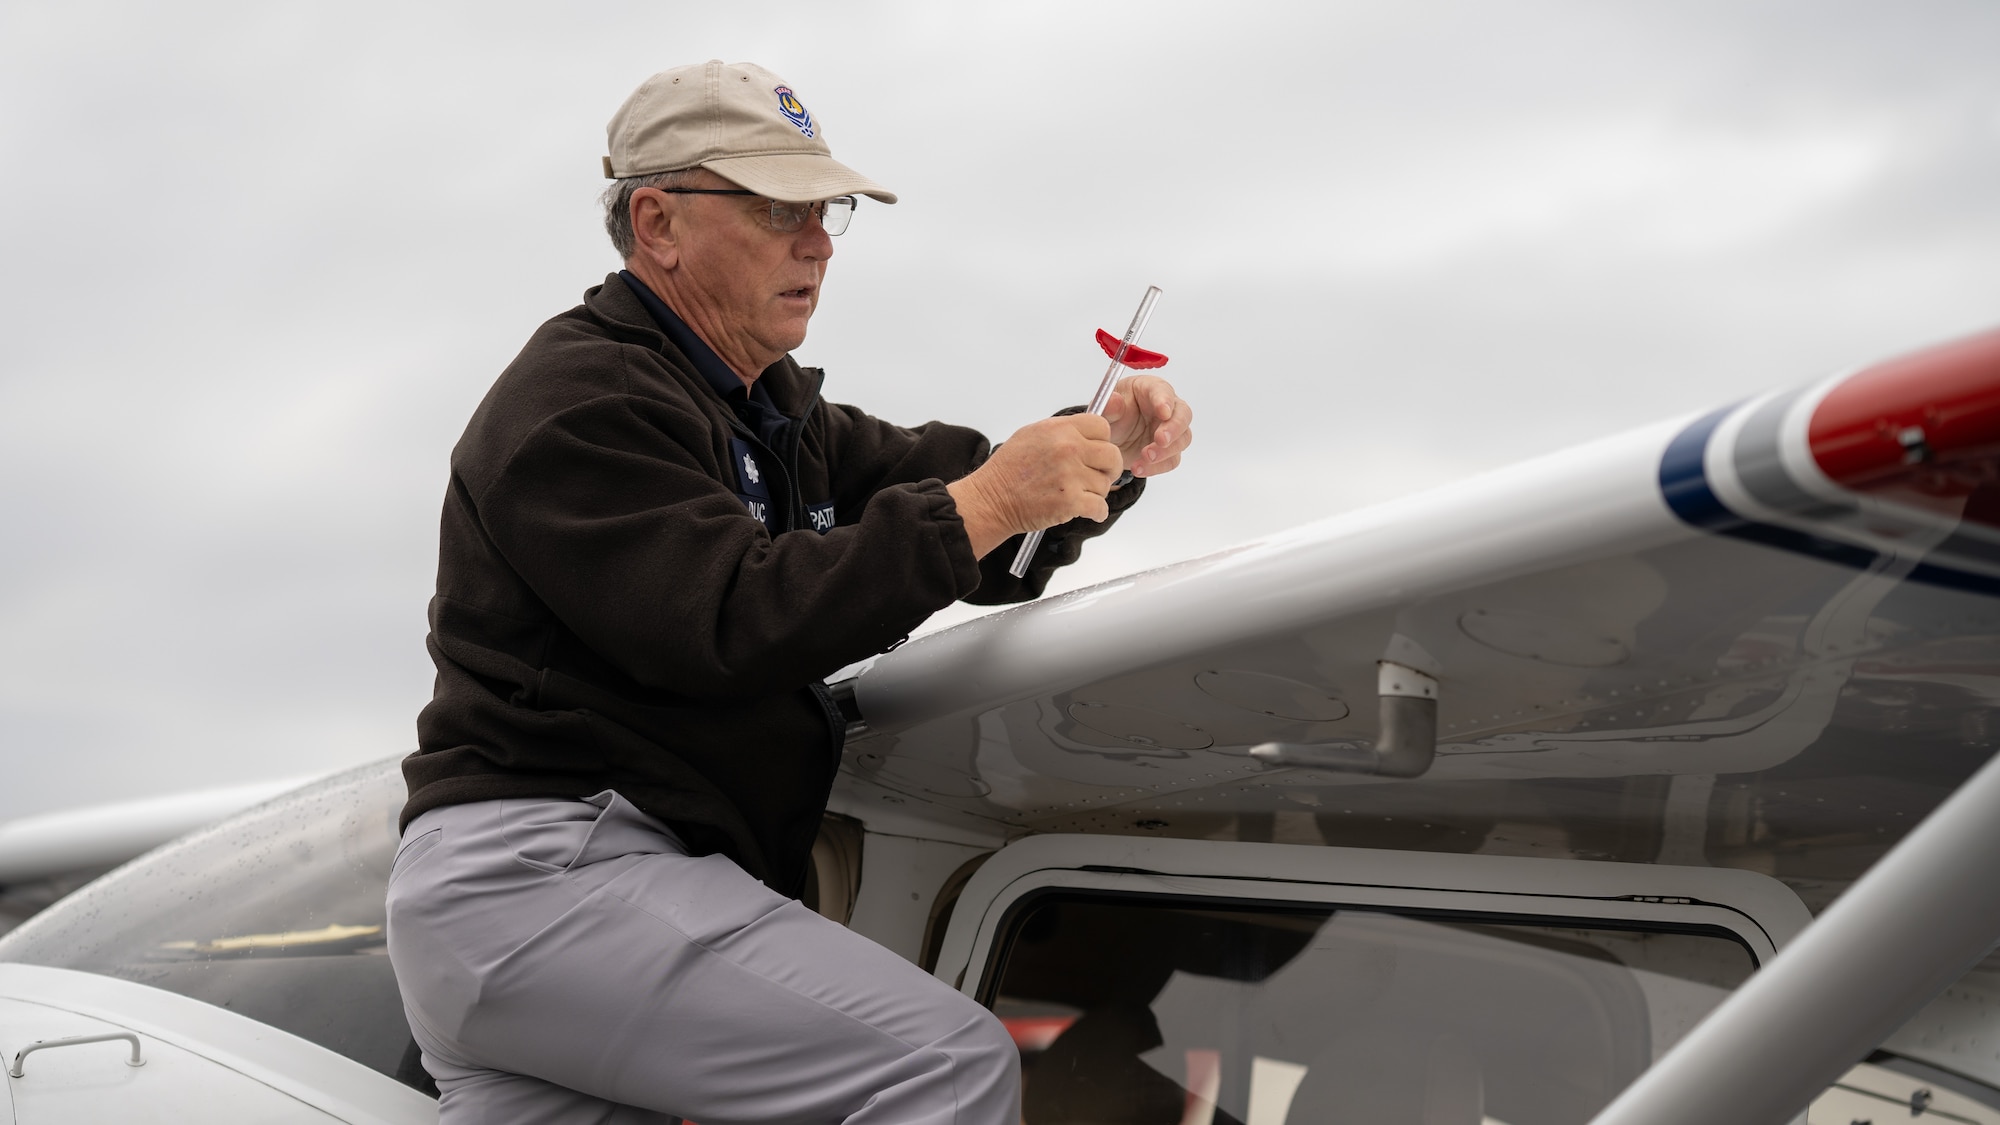 Civil Air Patrol pilot instructor demonstrates how to check the fuel of an aircraft.